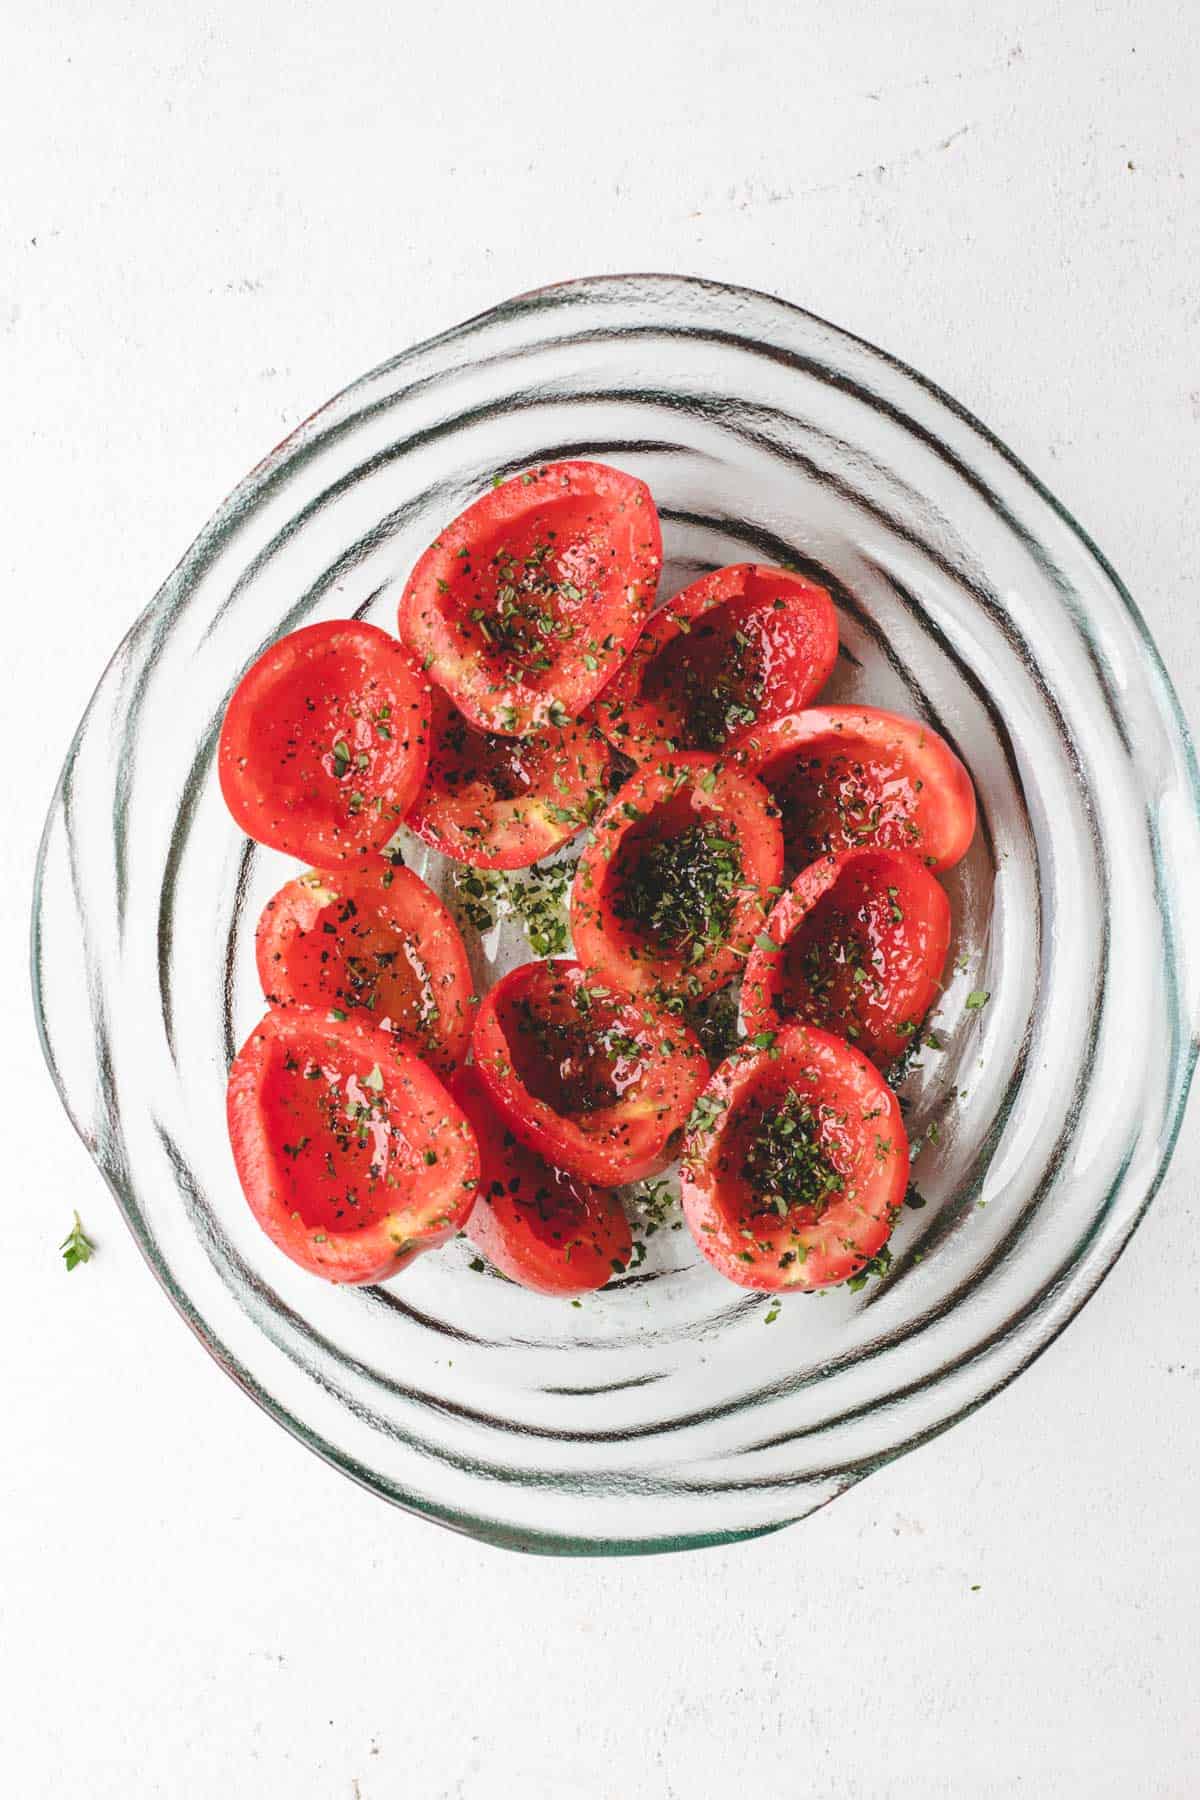 Tomatoes that have been sliced and tossed in a large bowl with olive oil, fresh thyme, salt, and pepper.